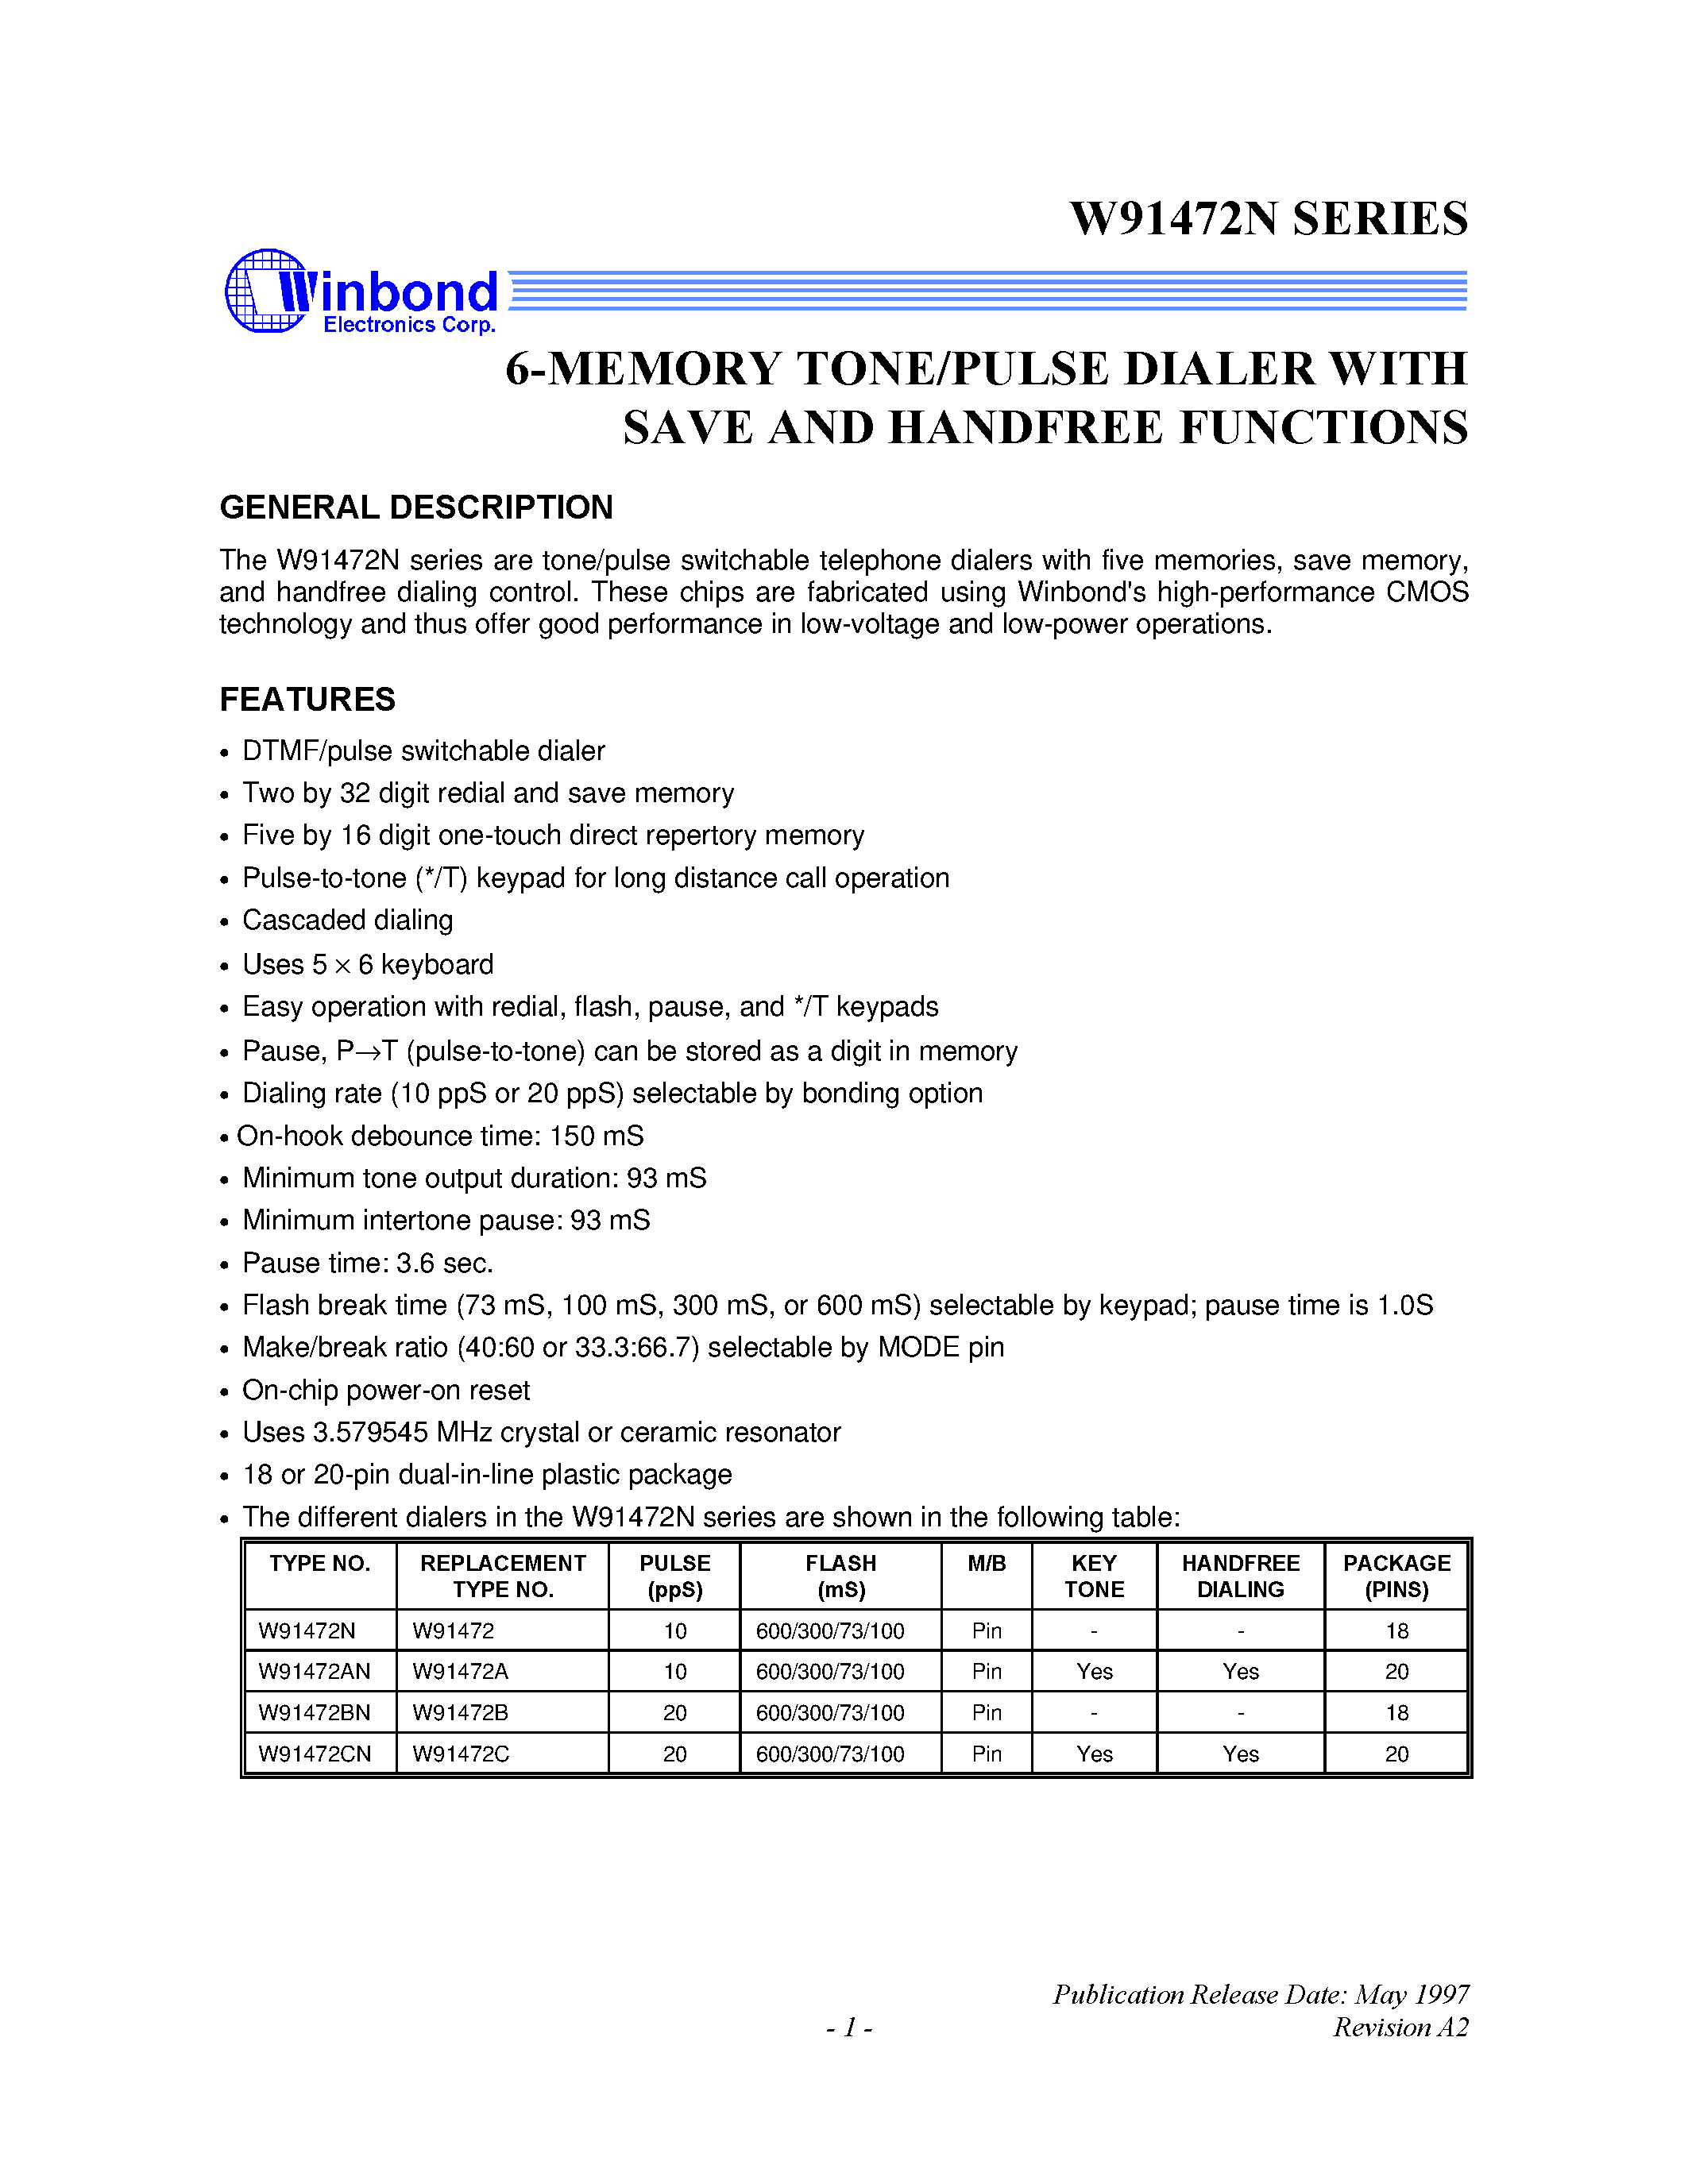 Datasheet W91472CN - 6-MEMORY TONE/PULSE DIALER WITH SAVE AND HANDFREE FUNCTION page 1